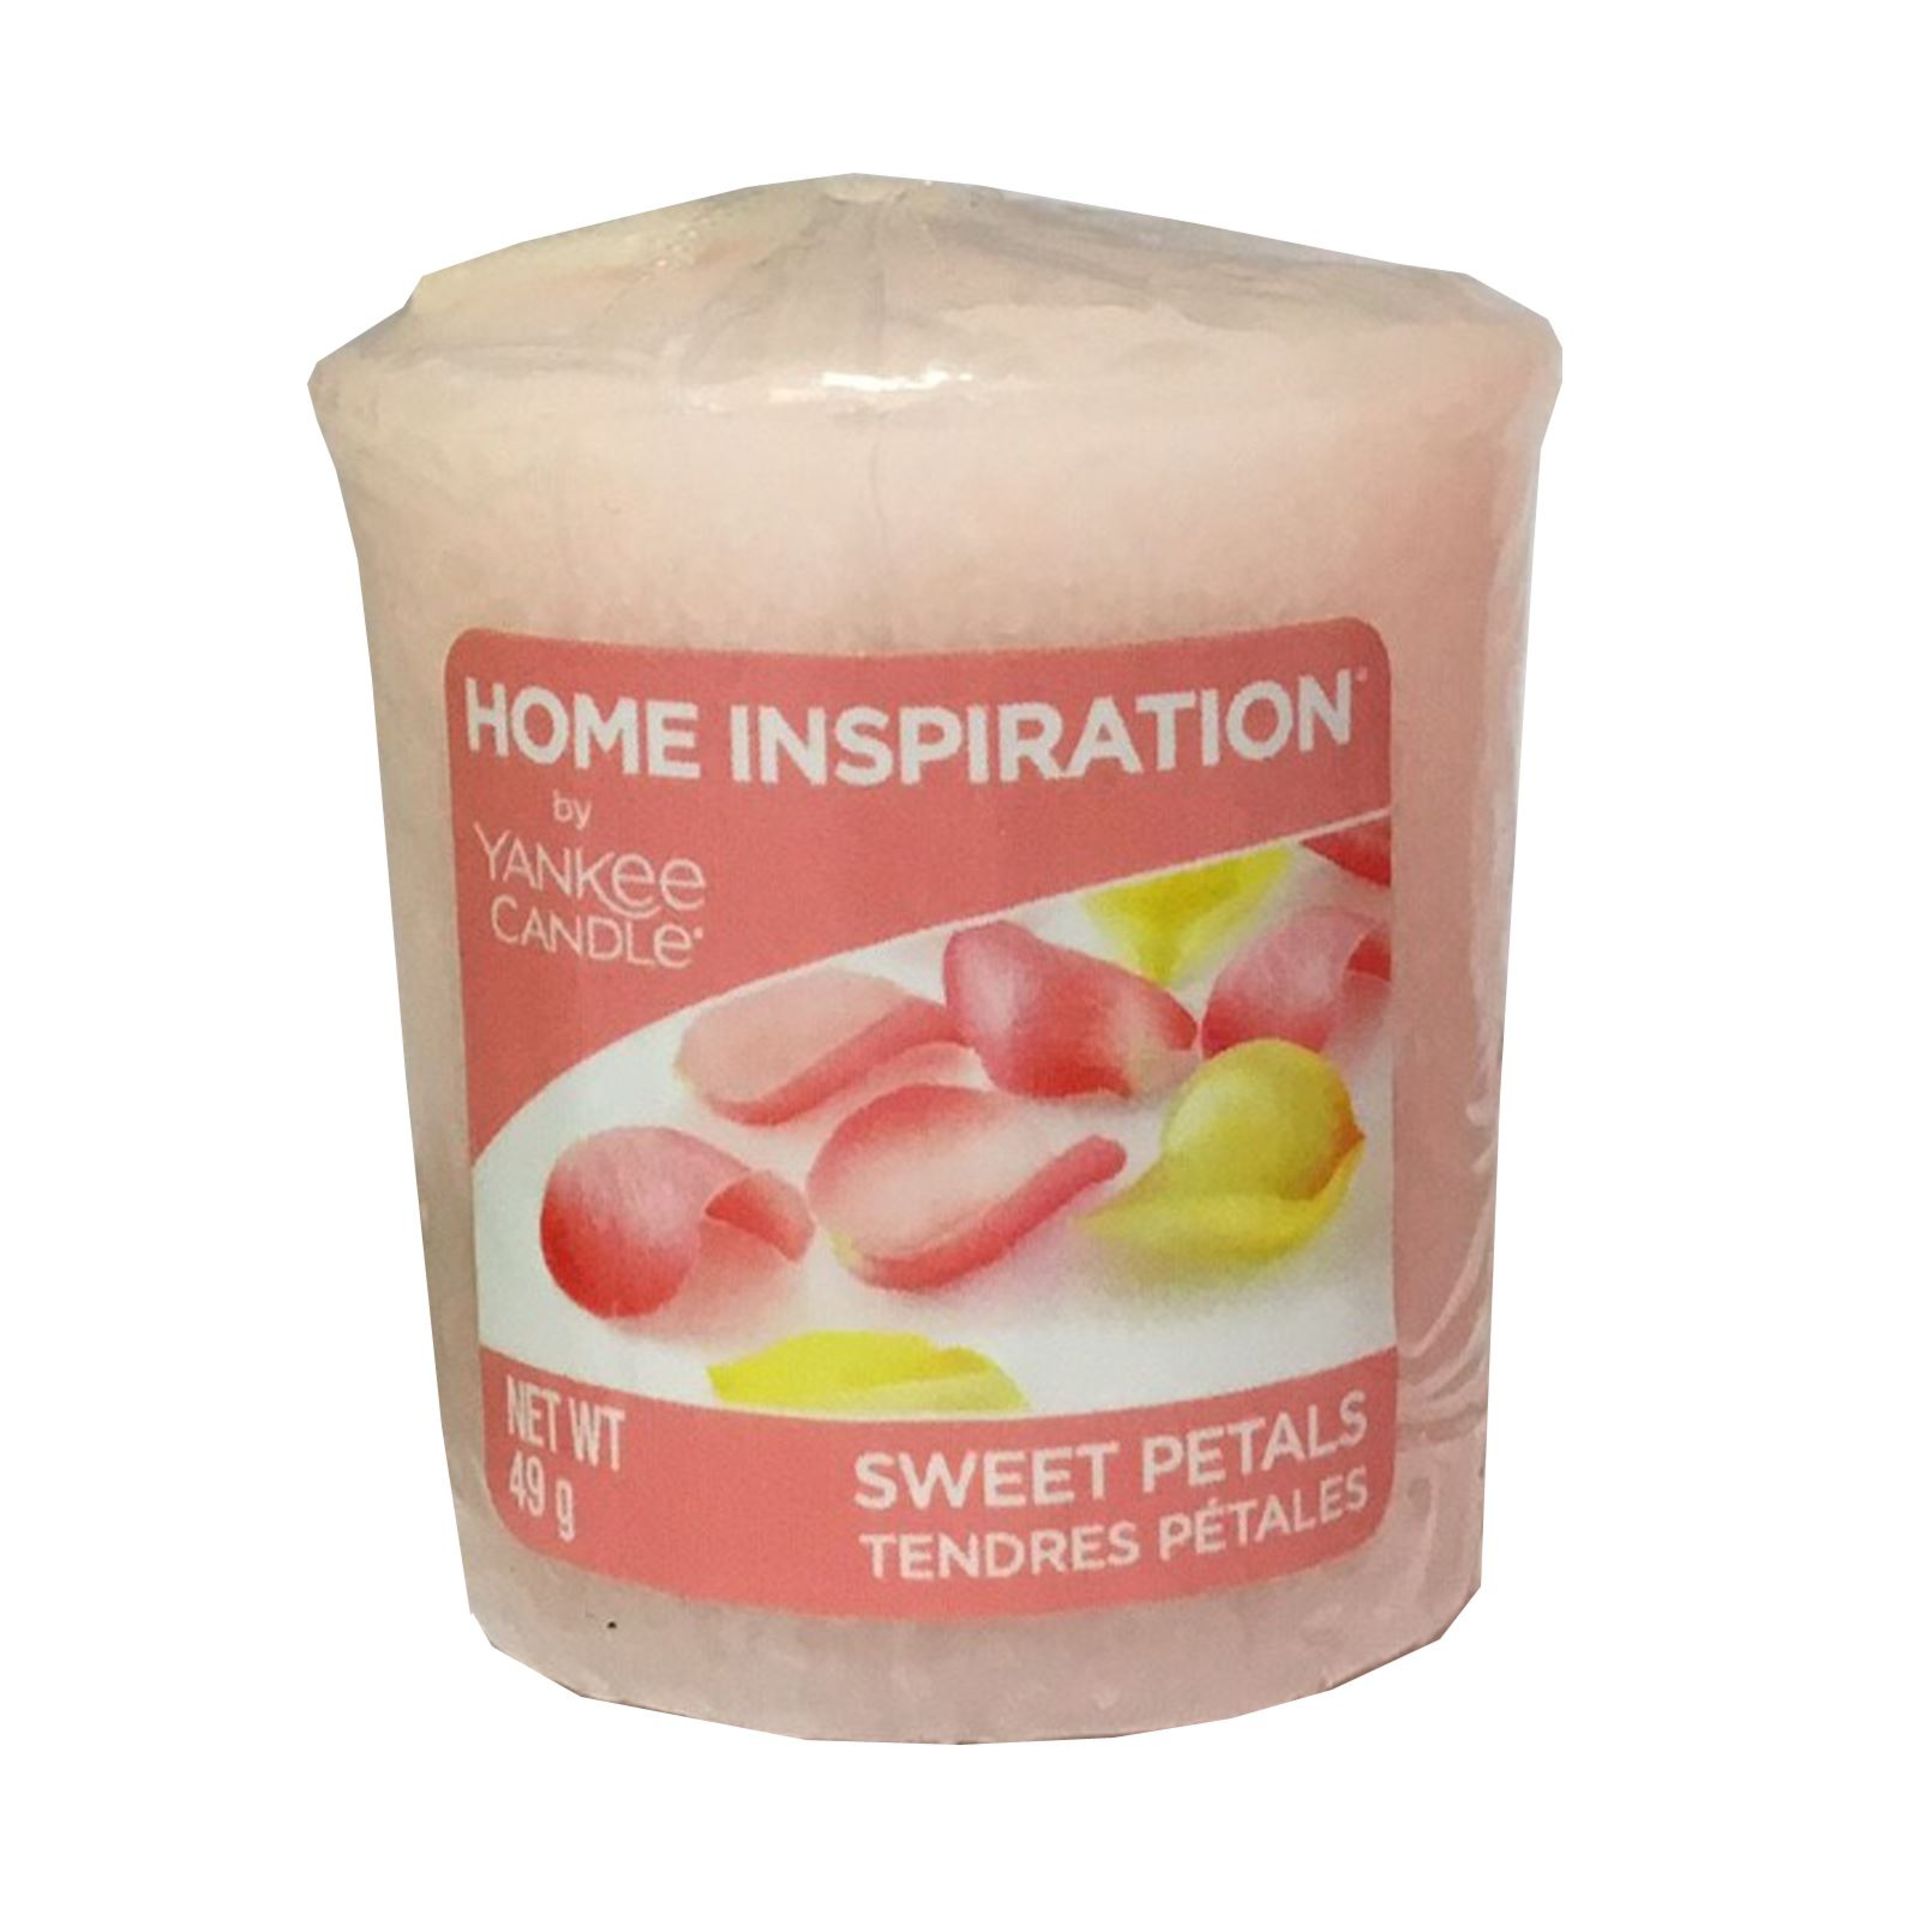 V Brand New 18 X Yankee Candle Votive Sweet Petals - eBay Price £107.82 X 2 YOUR BID PRICE TO BE - Image 2 of 2